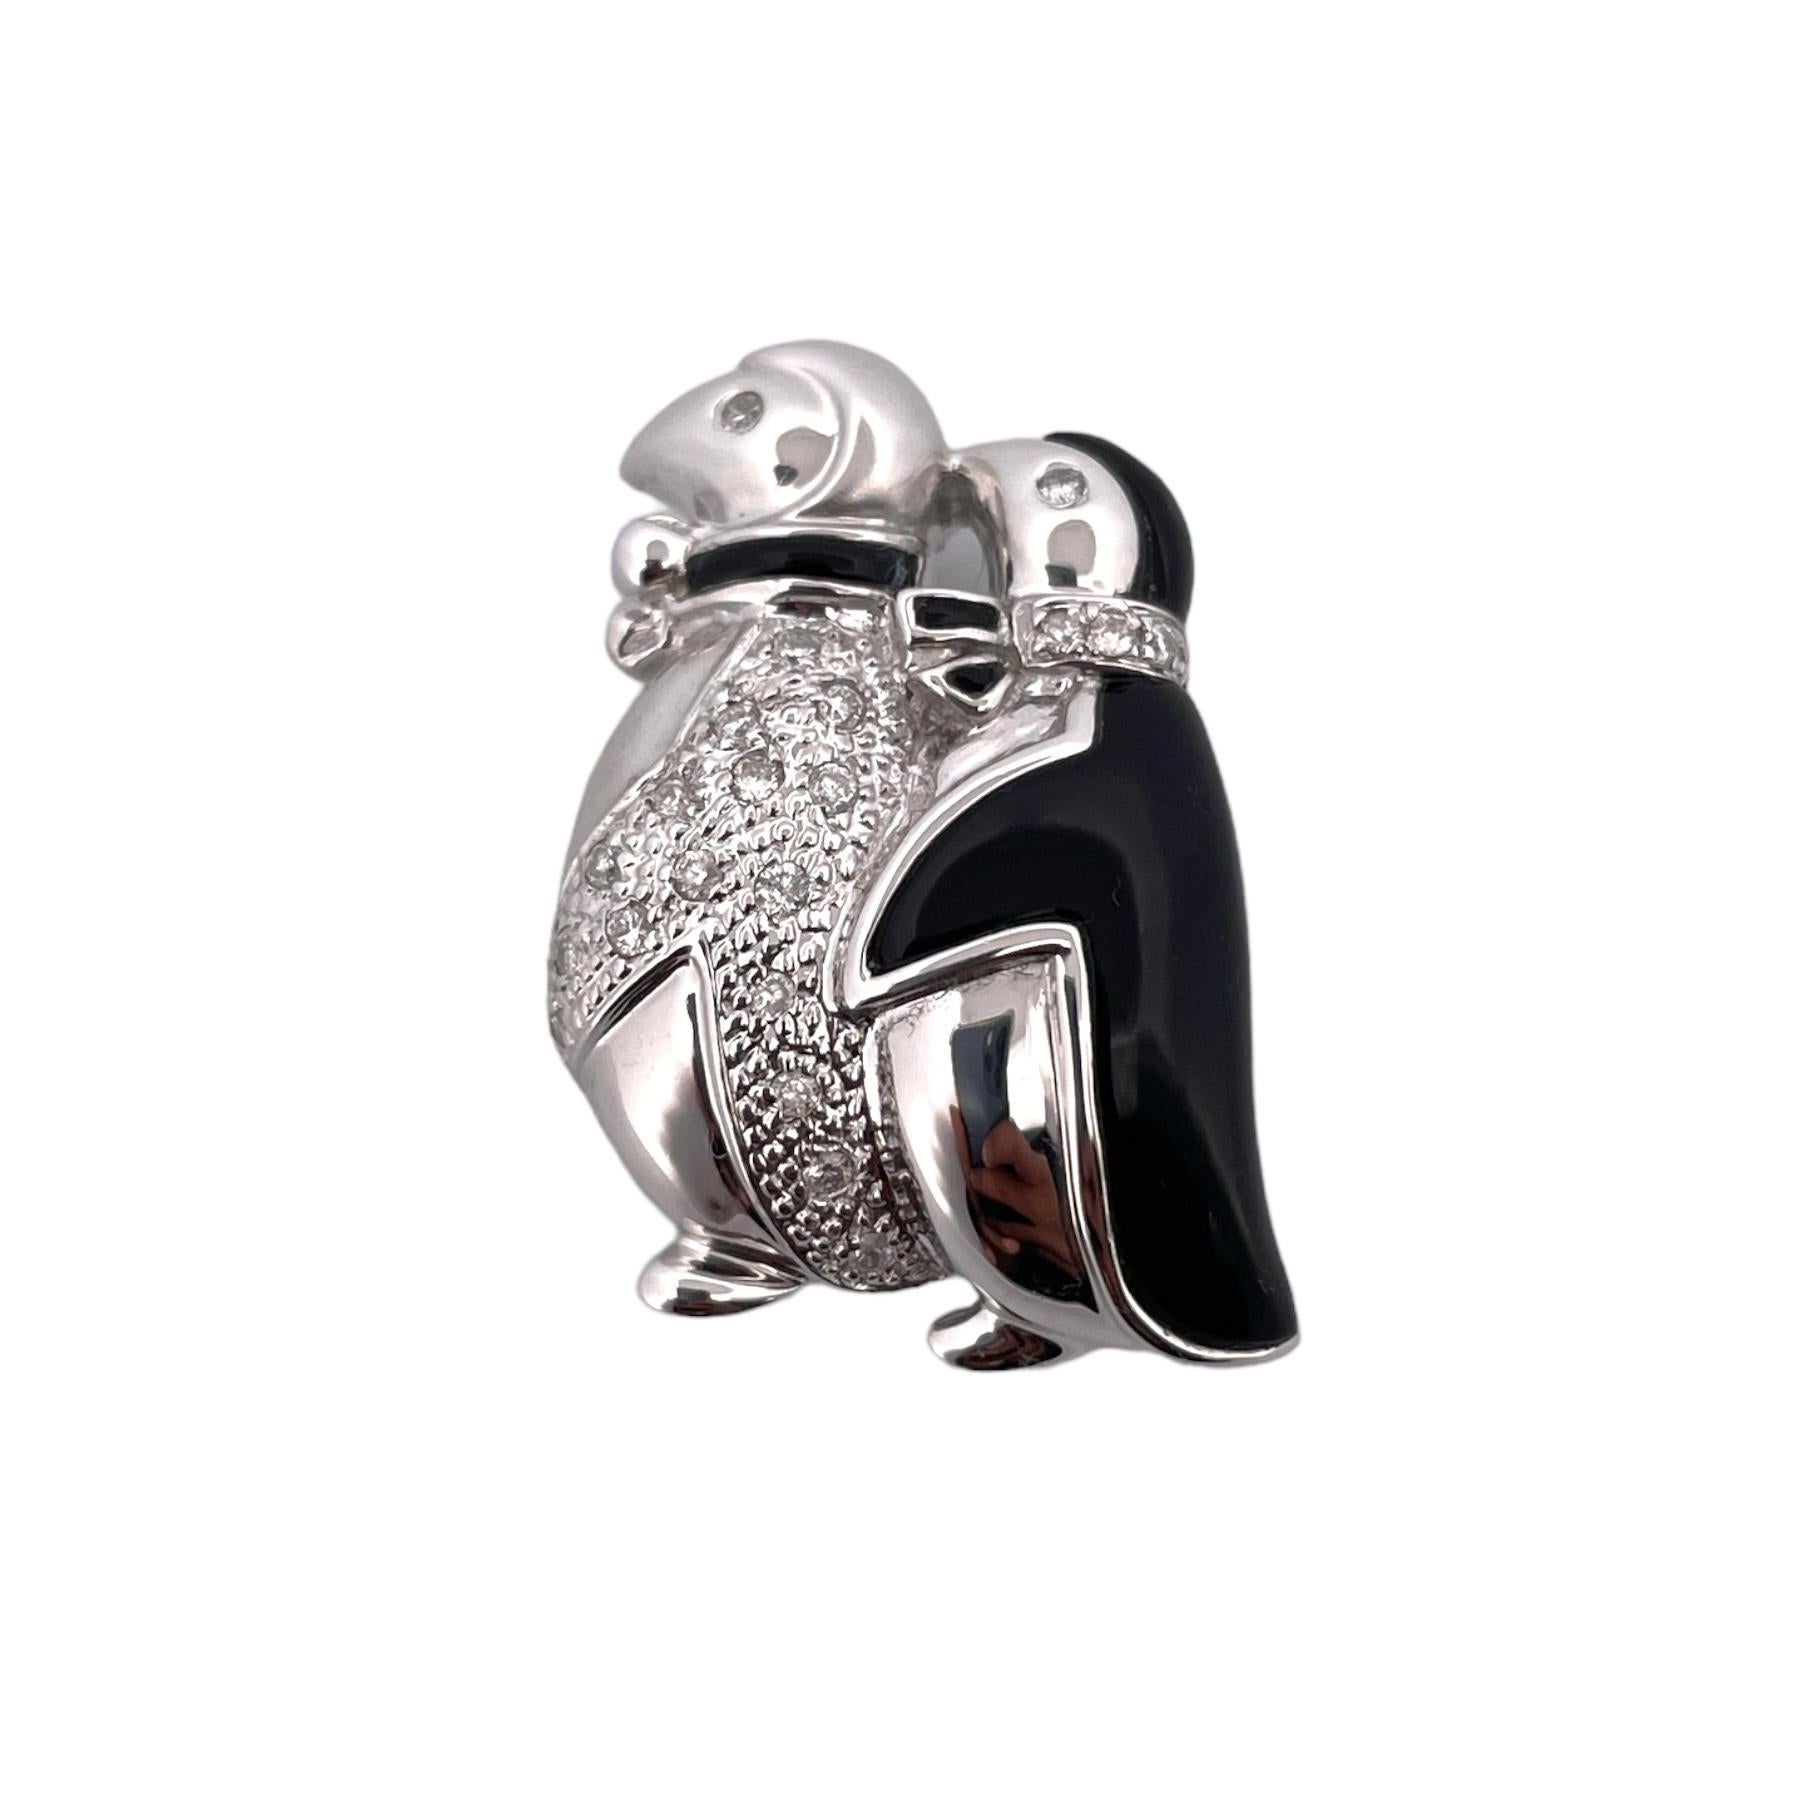 Celebrate the beauty of nature and elegance with this Onyx & Diamond Penguins Brooch, featuring a delightful pair of penguins adorned with a total carat weight (TCW) of 1.00 in diamonds.  Crafted in exquisite 14K white gold and weighing 7.78 grams,